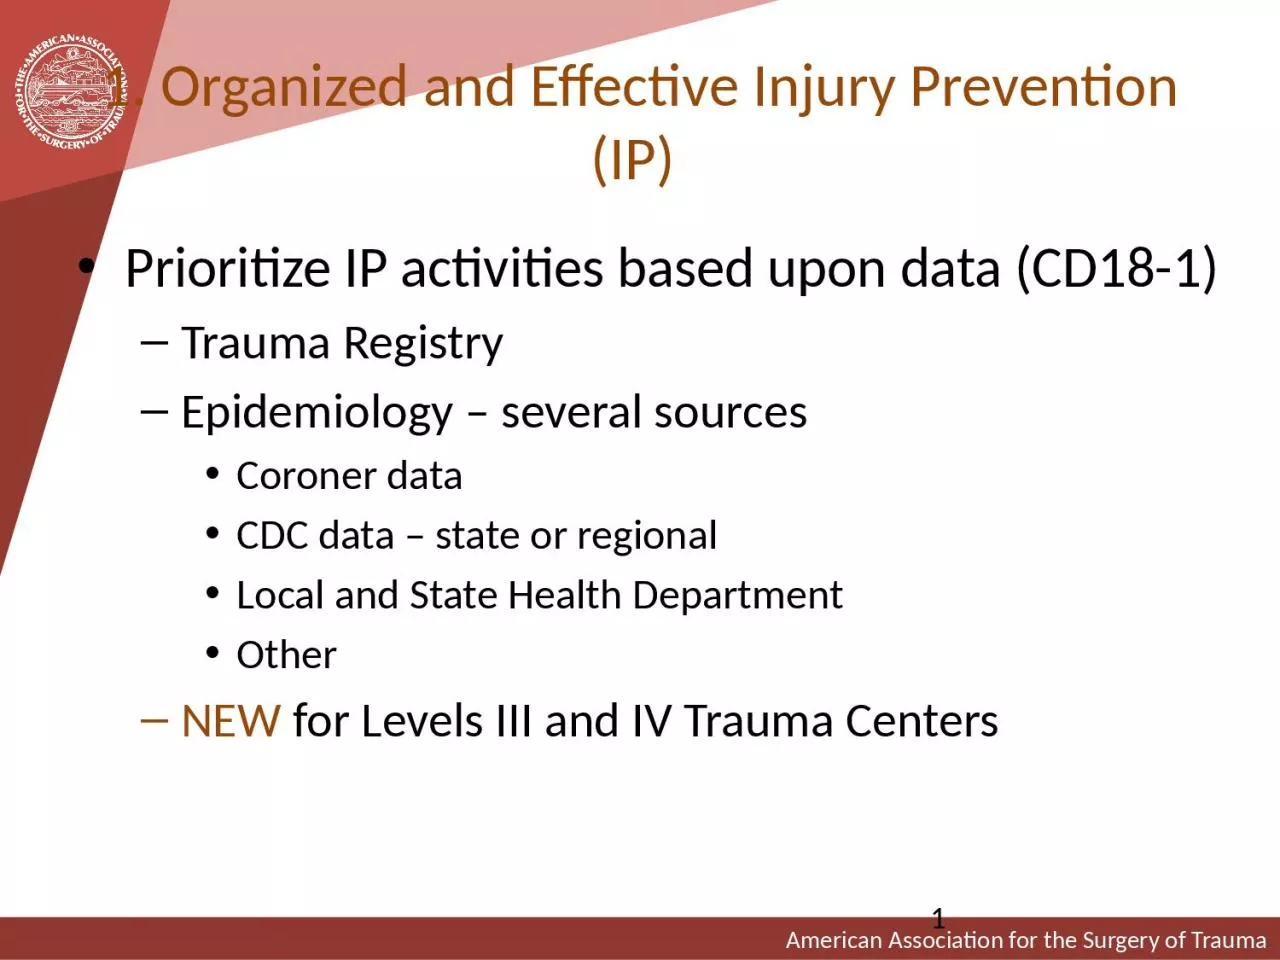 1. Organized and Effective Injury Prevention (IP)